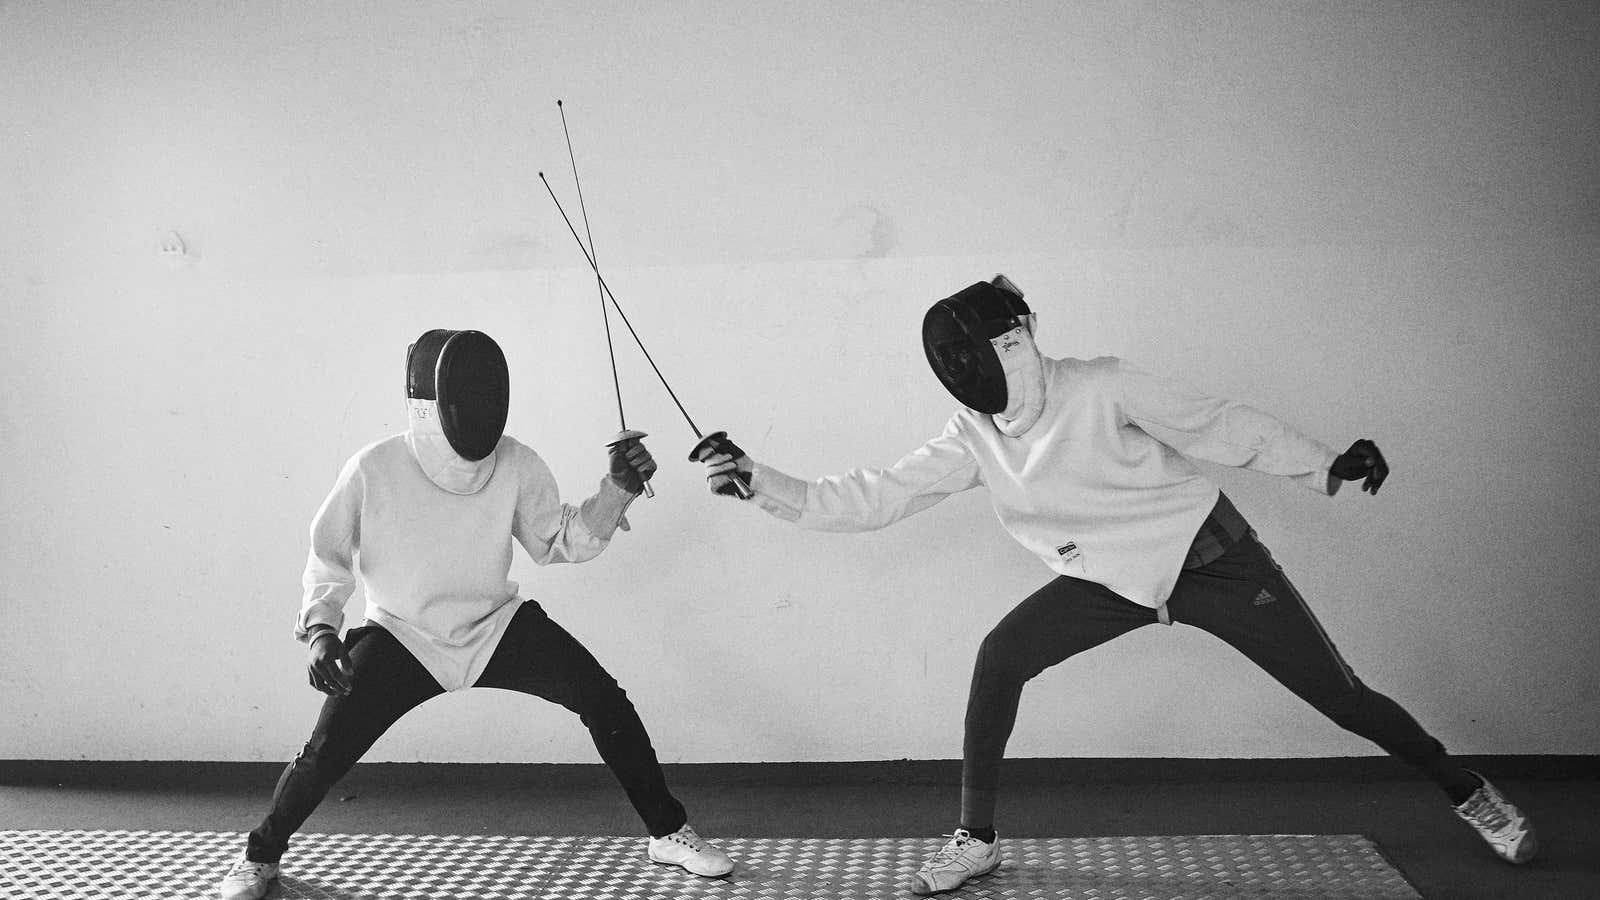 Photos: For Senegal’s jailed minors and street kids, fencing is more than just a sport